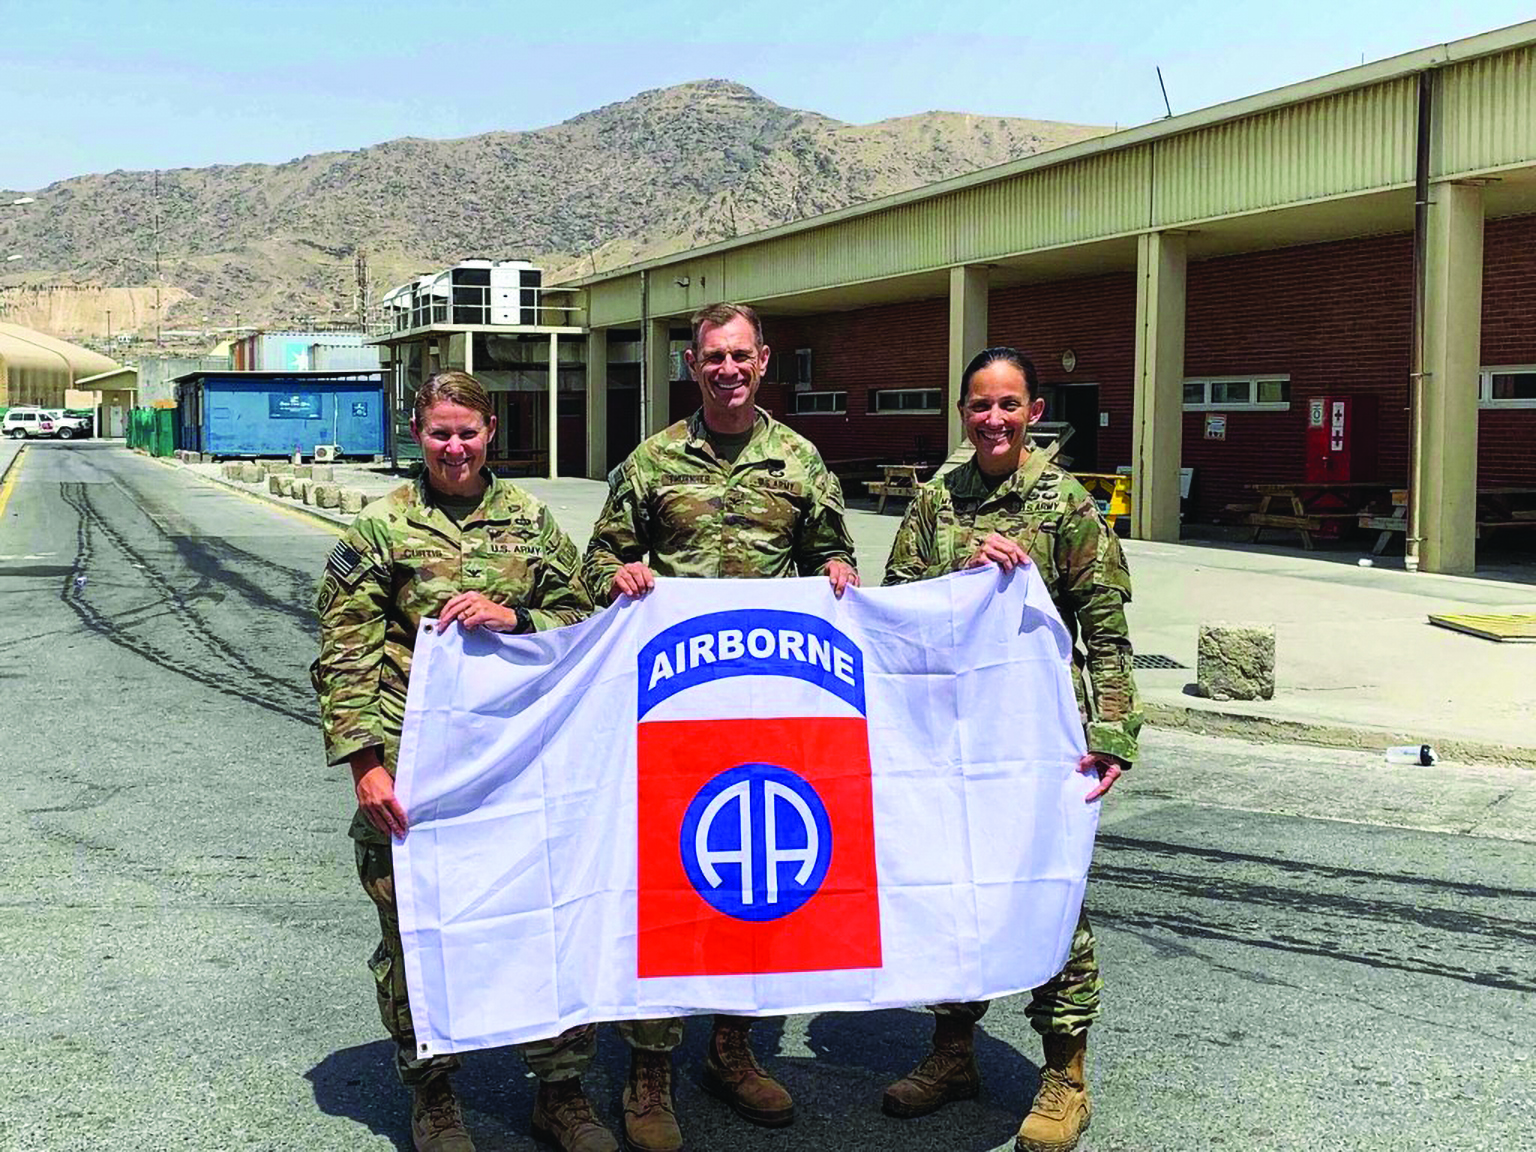 COL Jeffrey Thurnher, 82d Airborne Division SJA, stands with two of the Division’s brigade commanders in
            Afghanistan during their final mission in Afghanistan. (Photo courtesy of COL Jeffrey Thurnher)